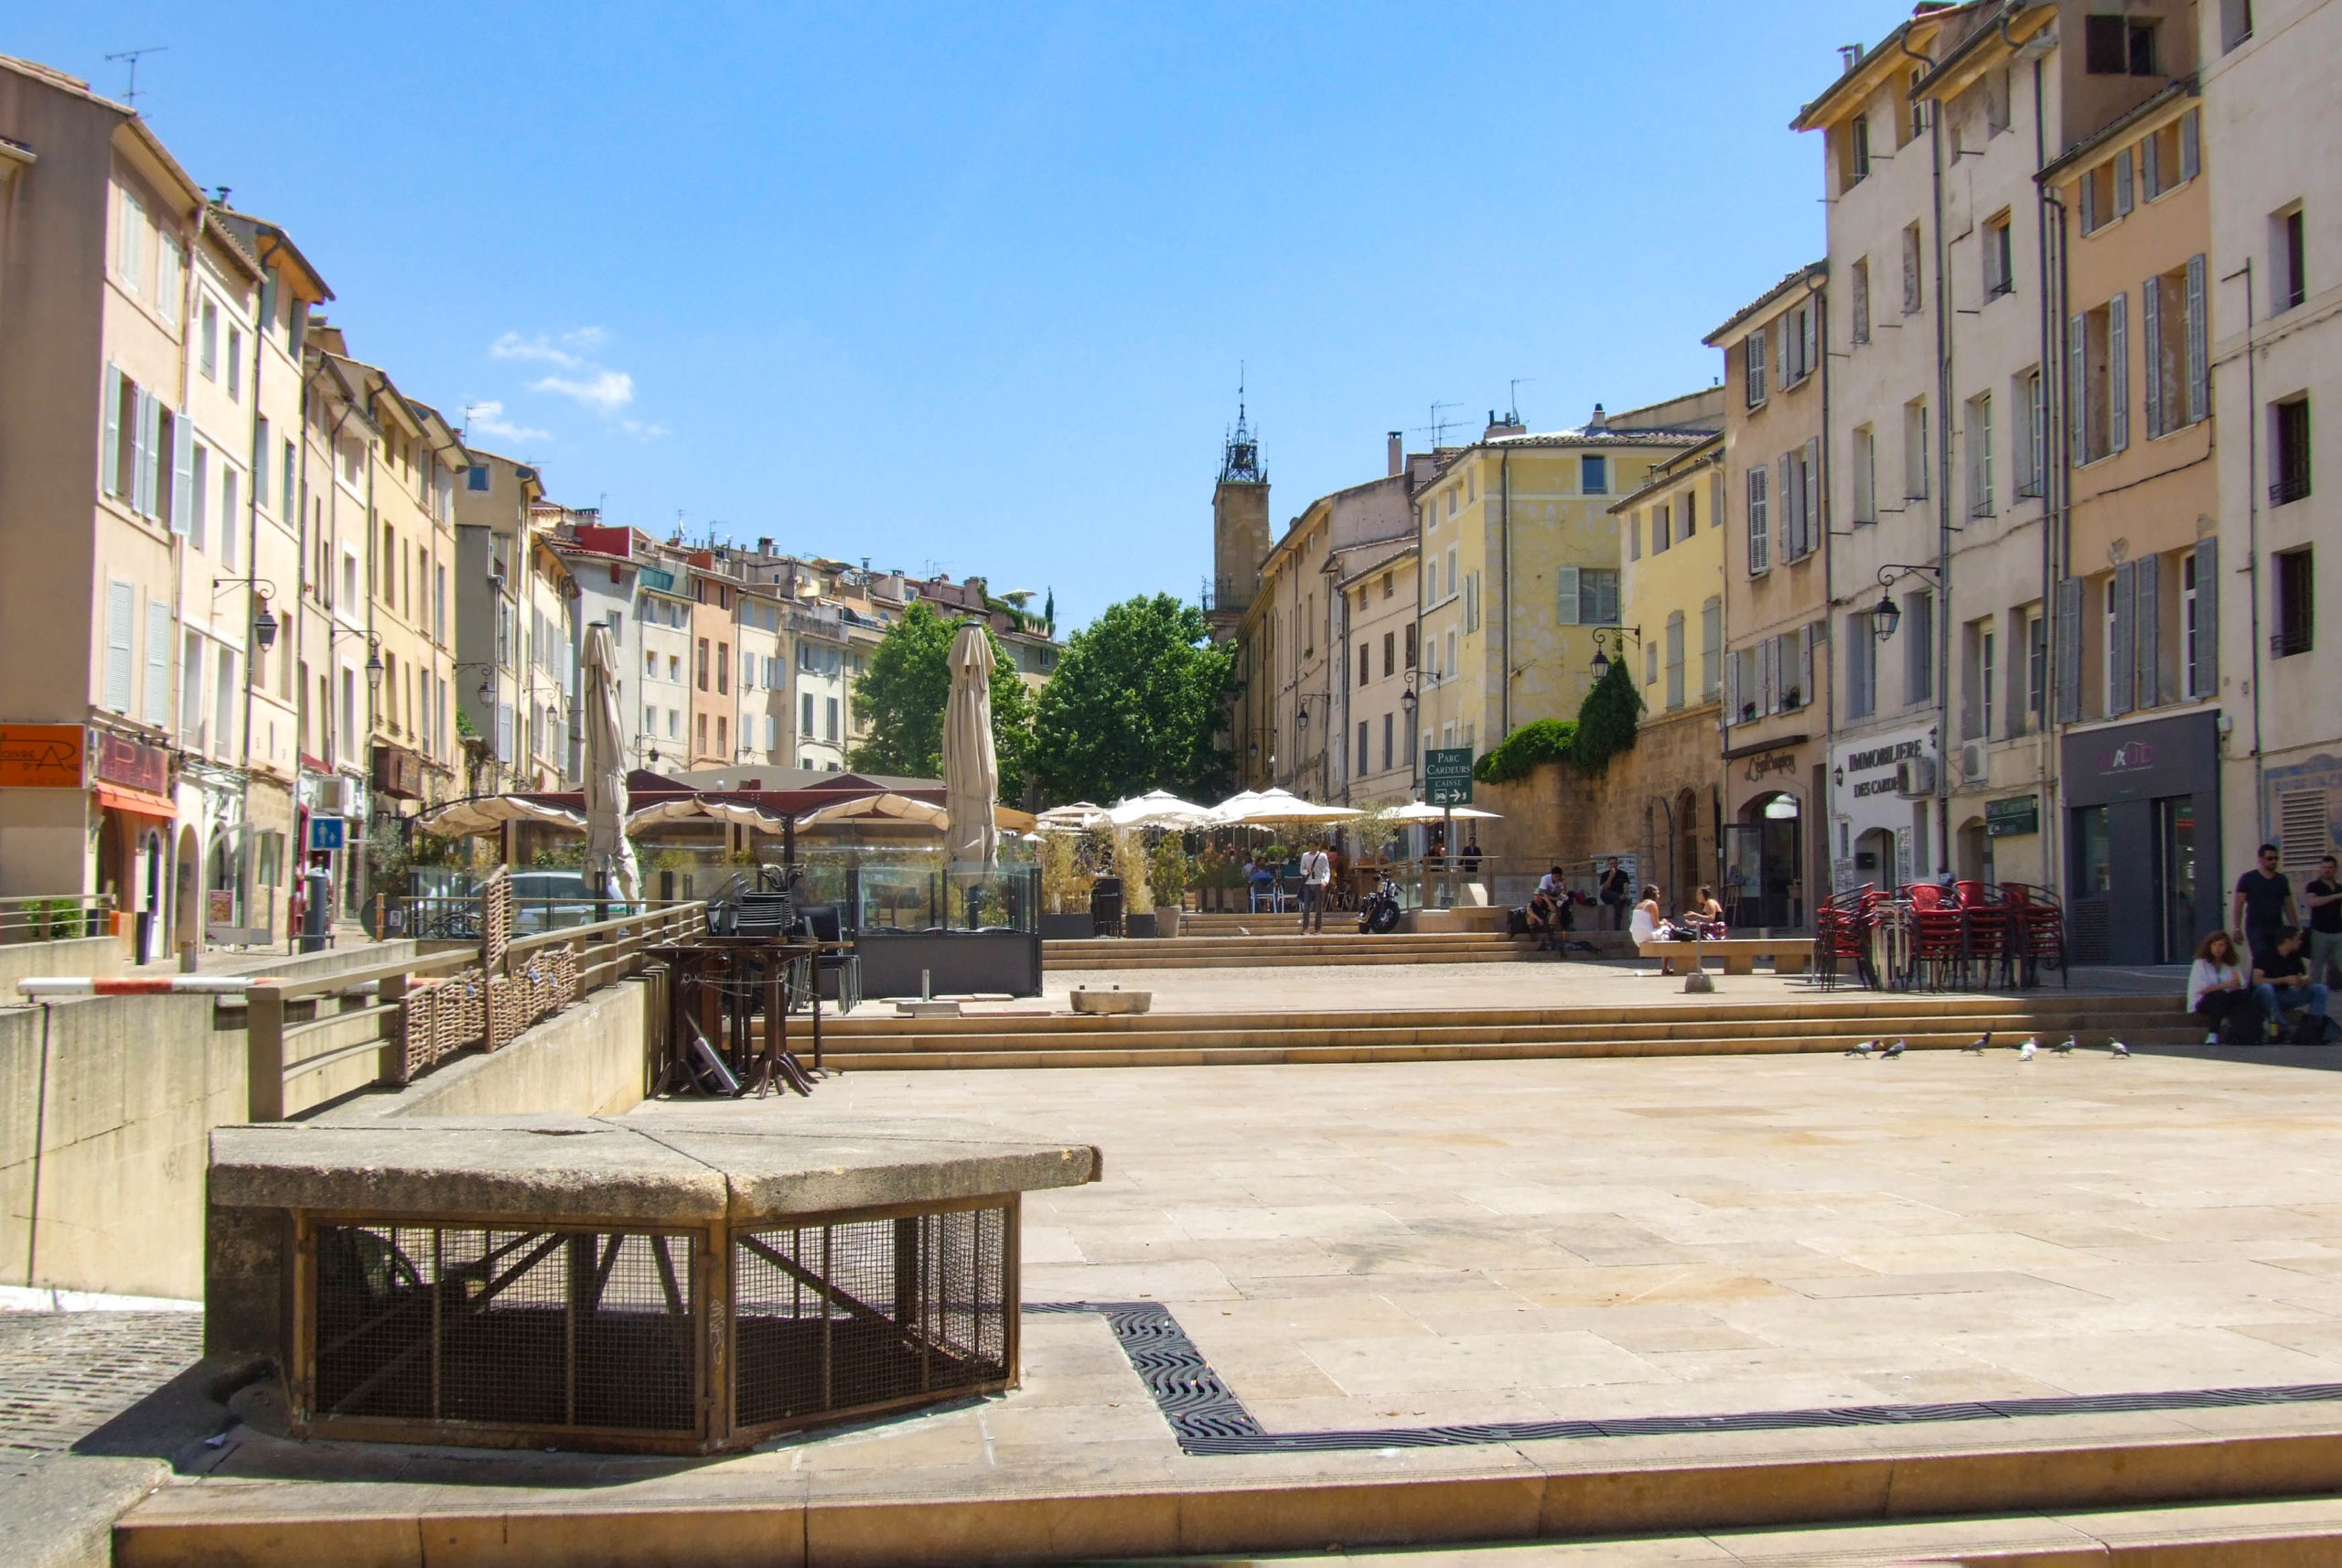 Aix-en-Provence old town - Place des Cardeurs © Odejea - licence [CC BY-SA 4.0] from Wikimedia Commons